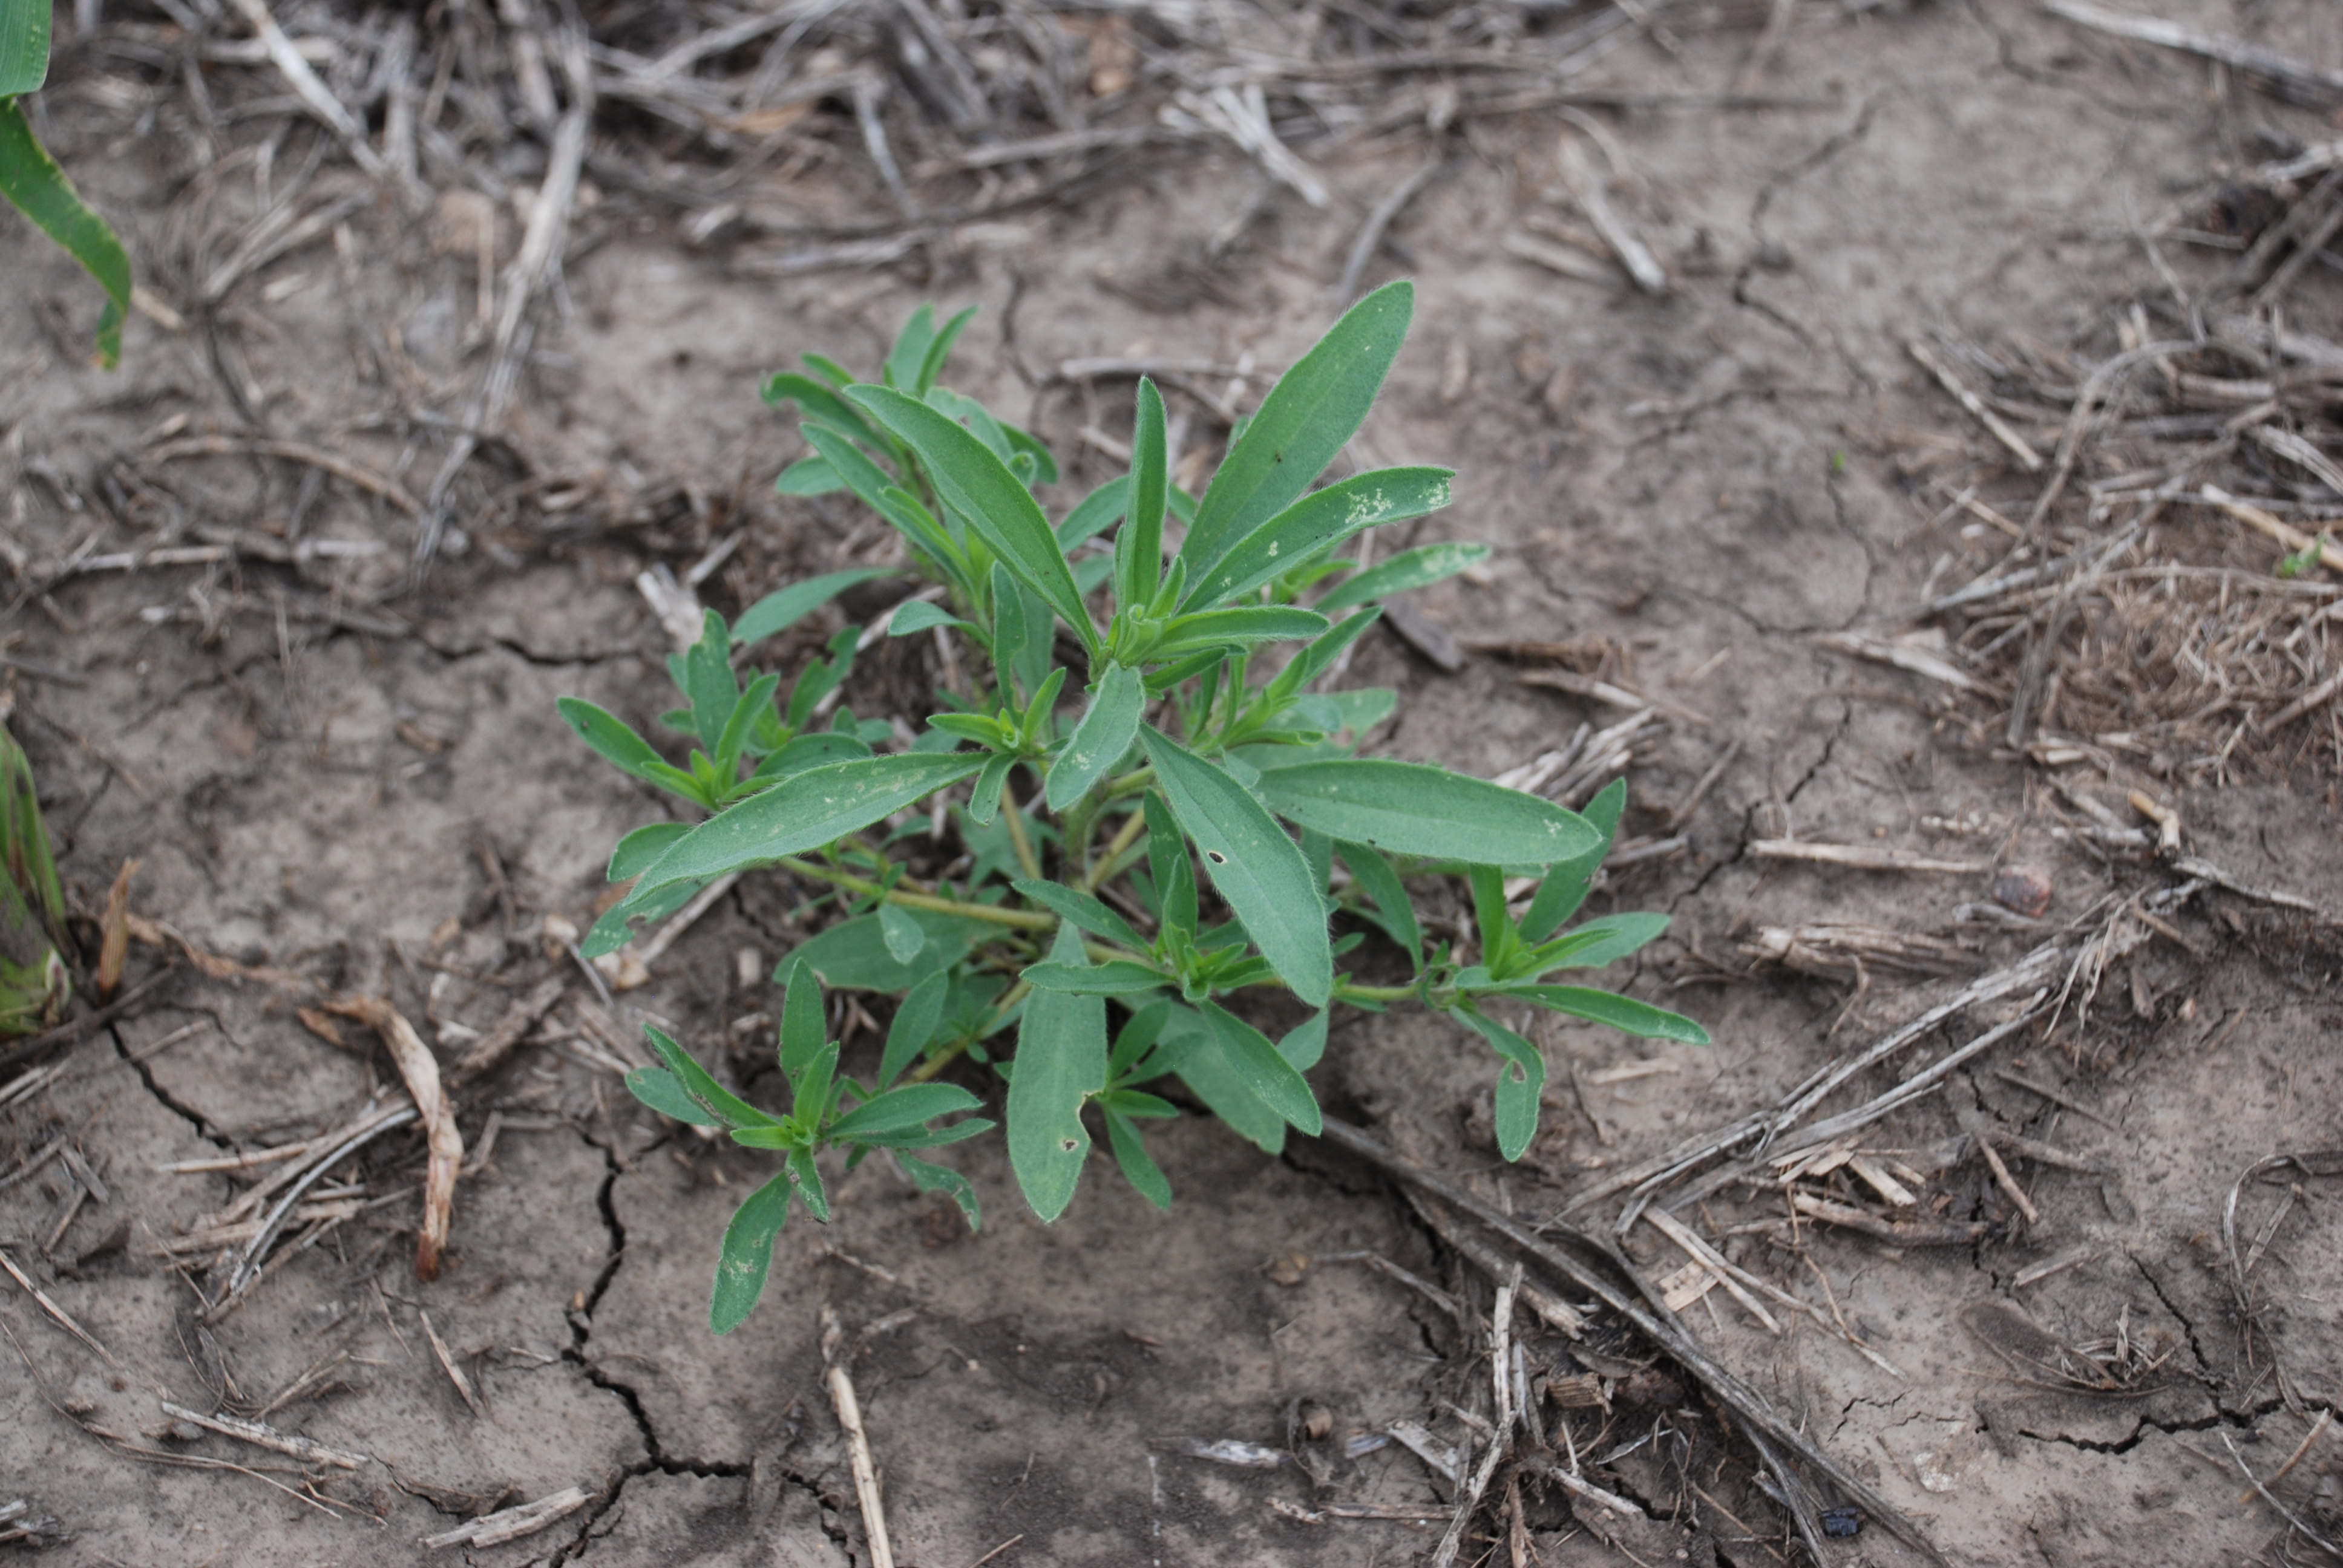 This agronomic photo shows a close up of the kochia weed.